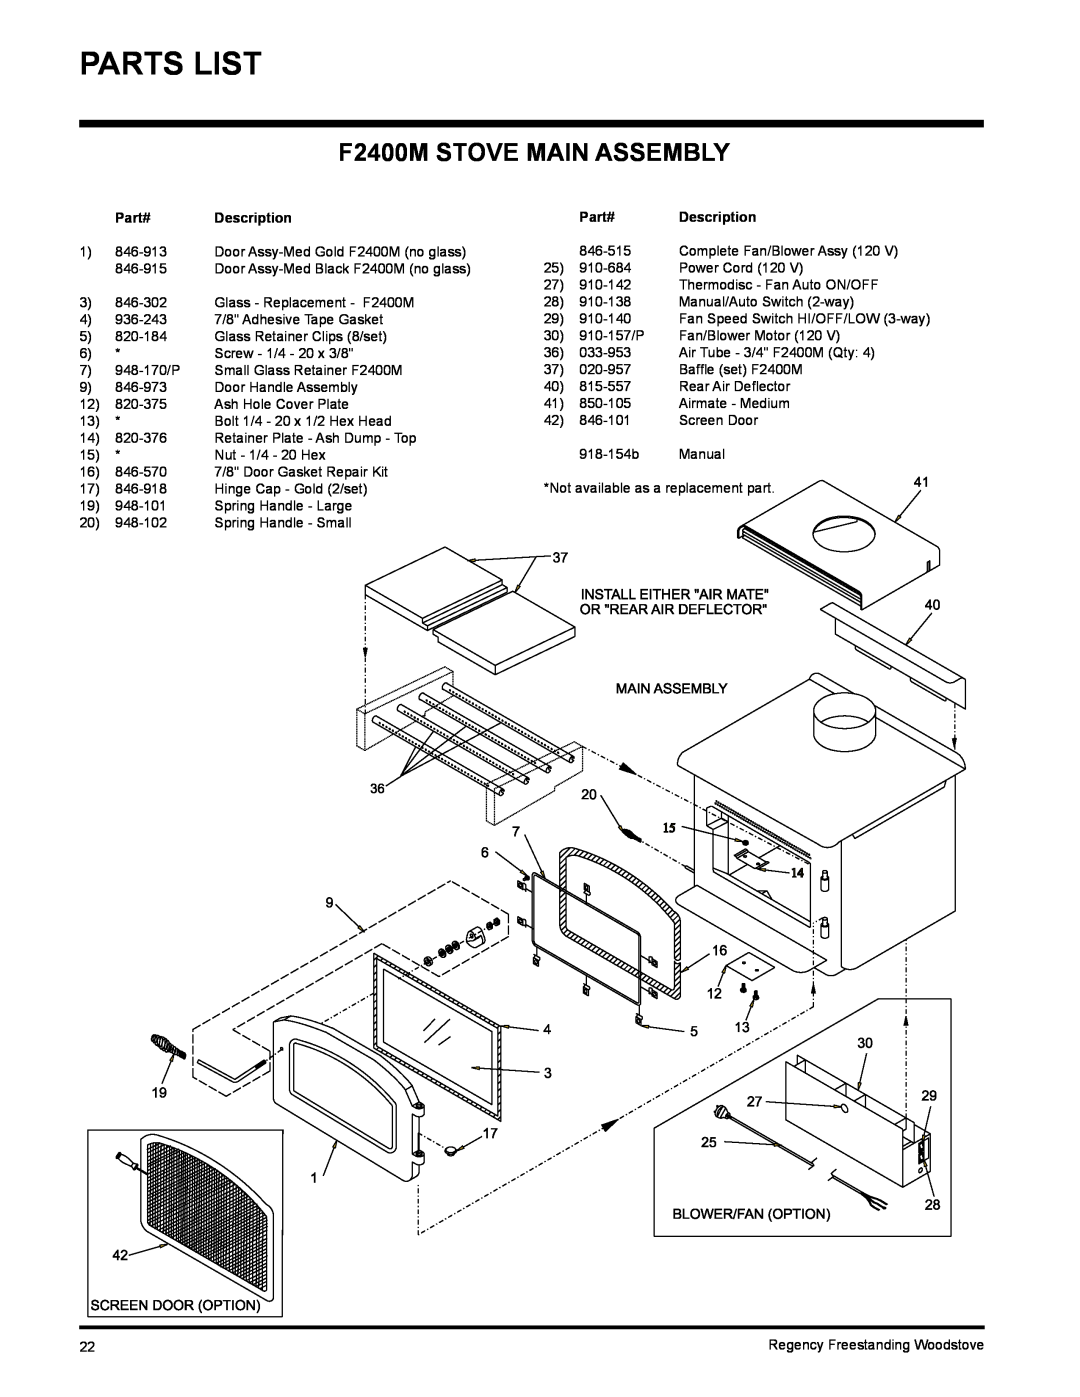 Regency S2400M installation manual Parts List, F2400M STOVE MAIN ASSEMBLY 